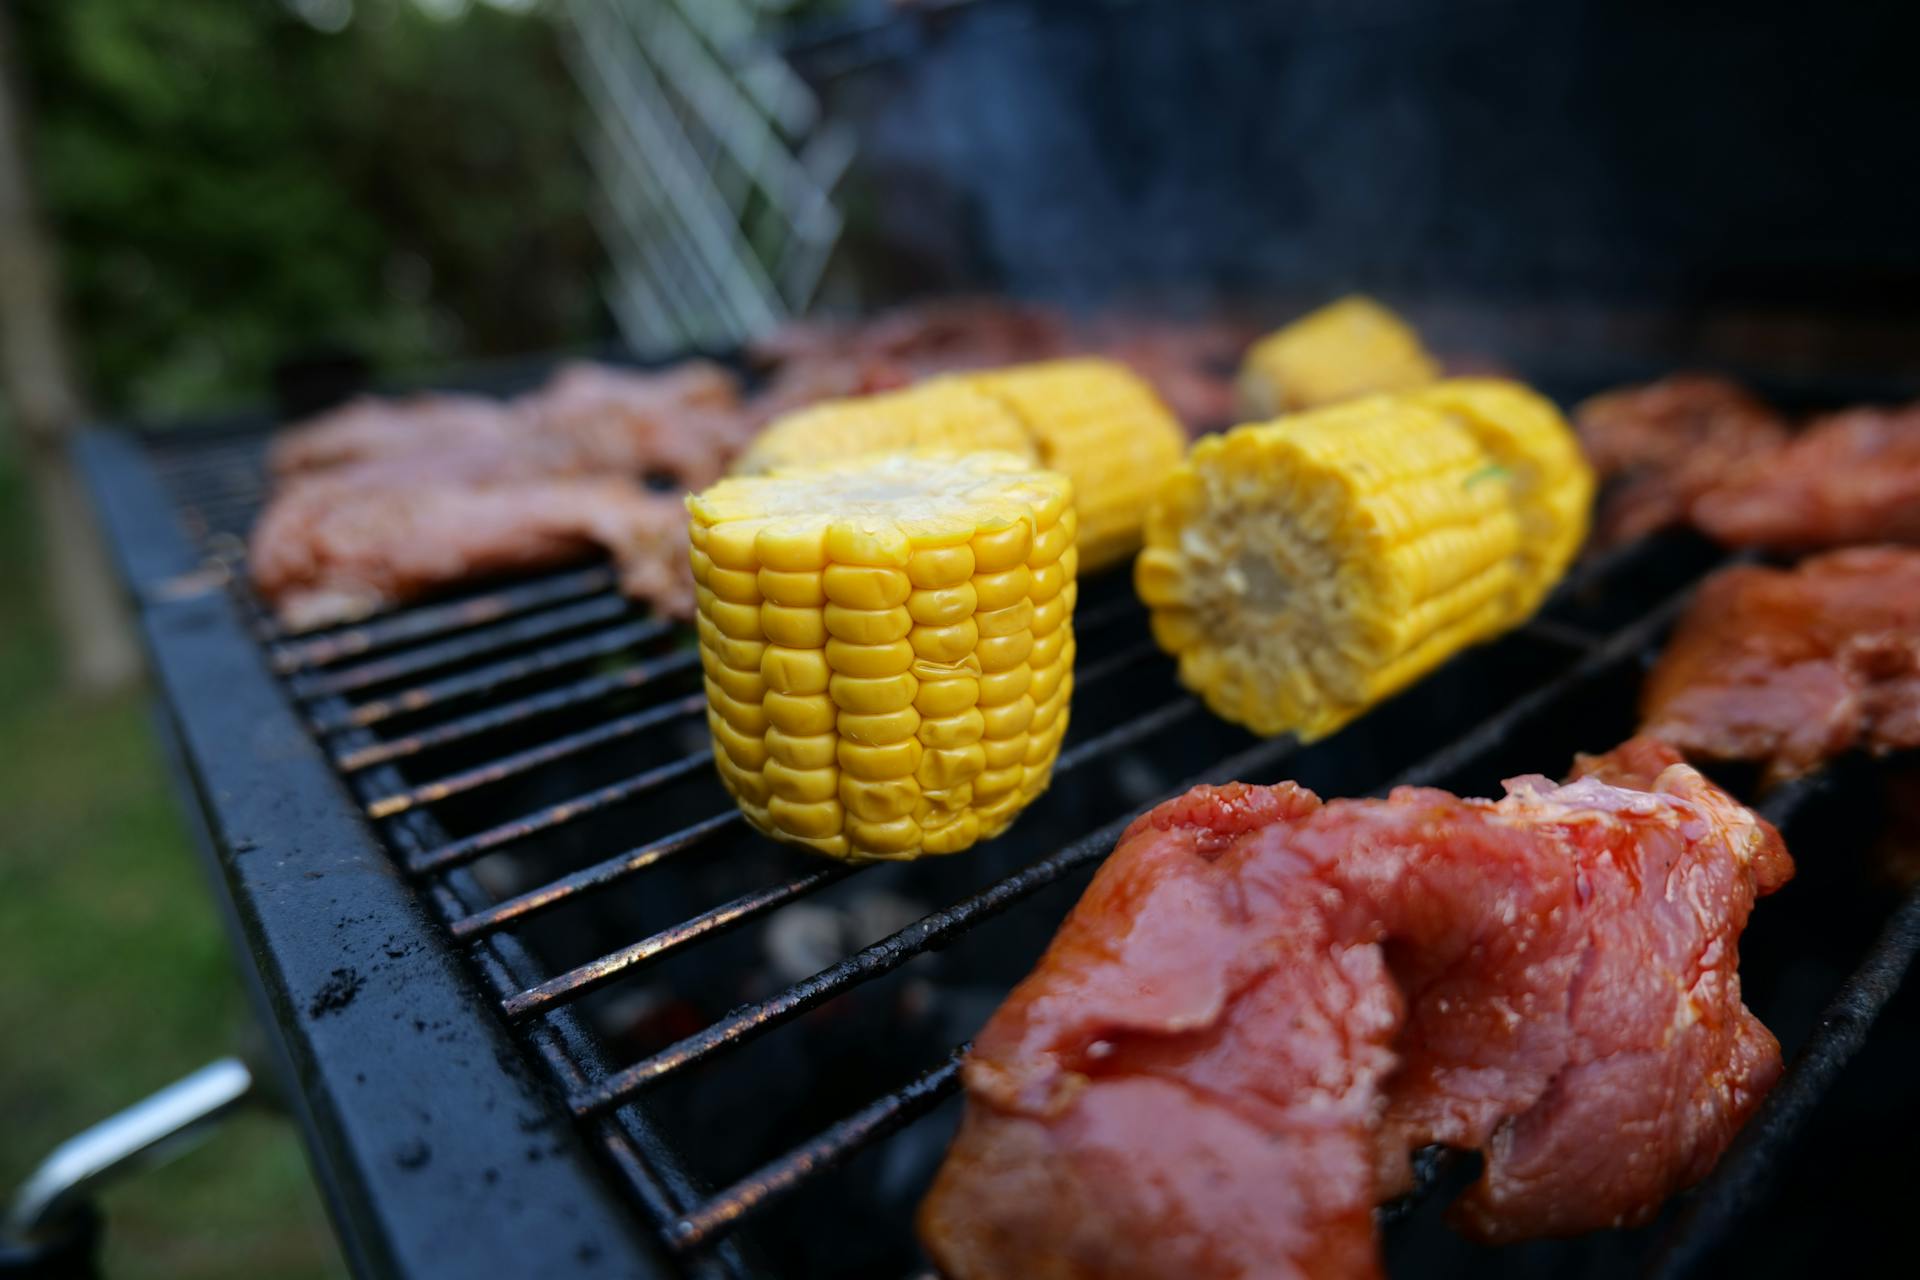 Fresh Beef and Sliced Corn on the Cobs on a Griller